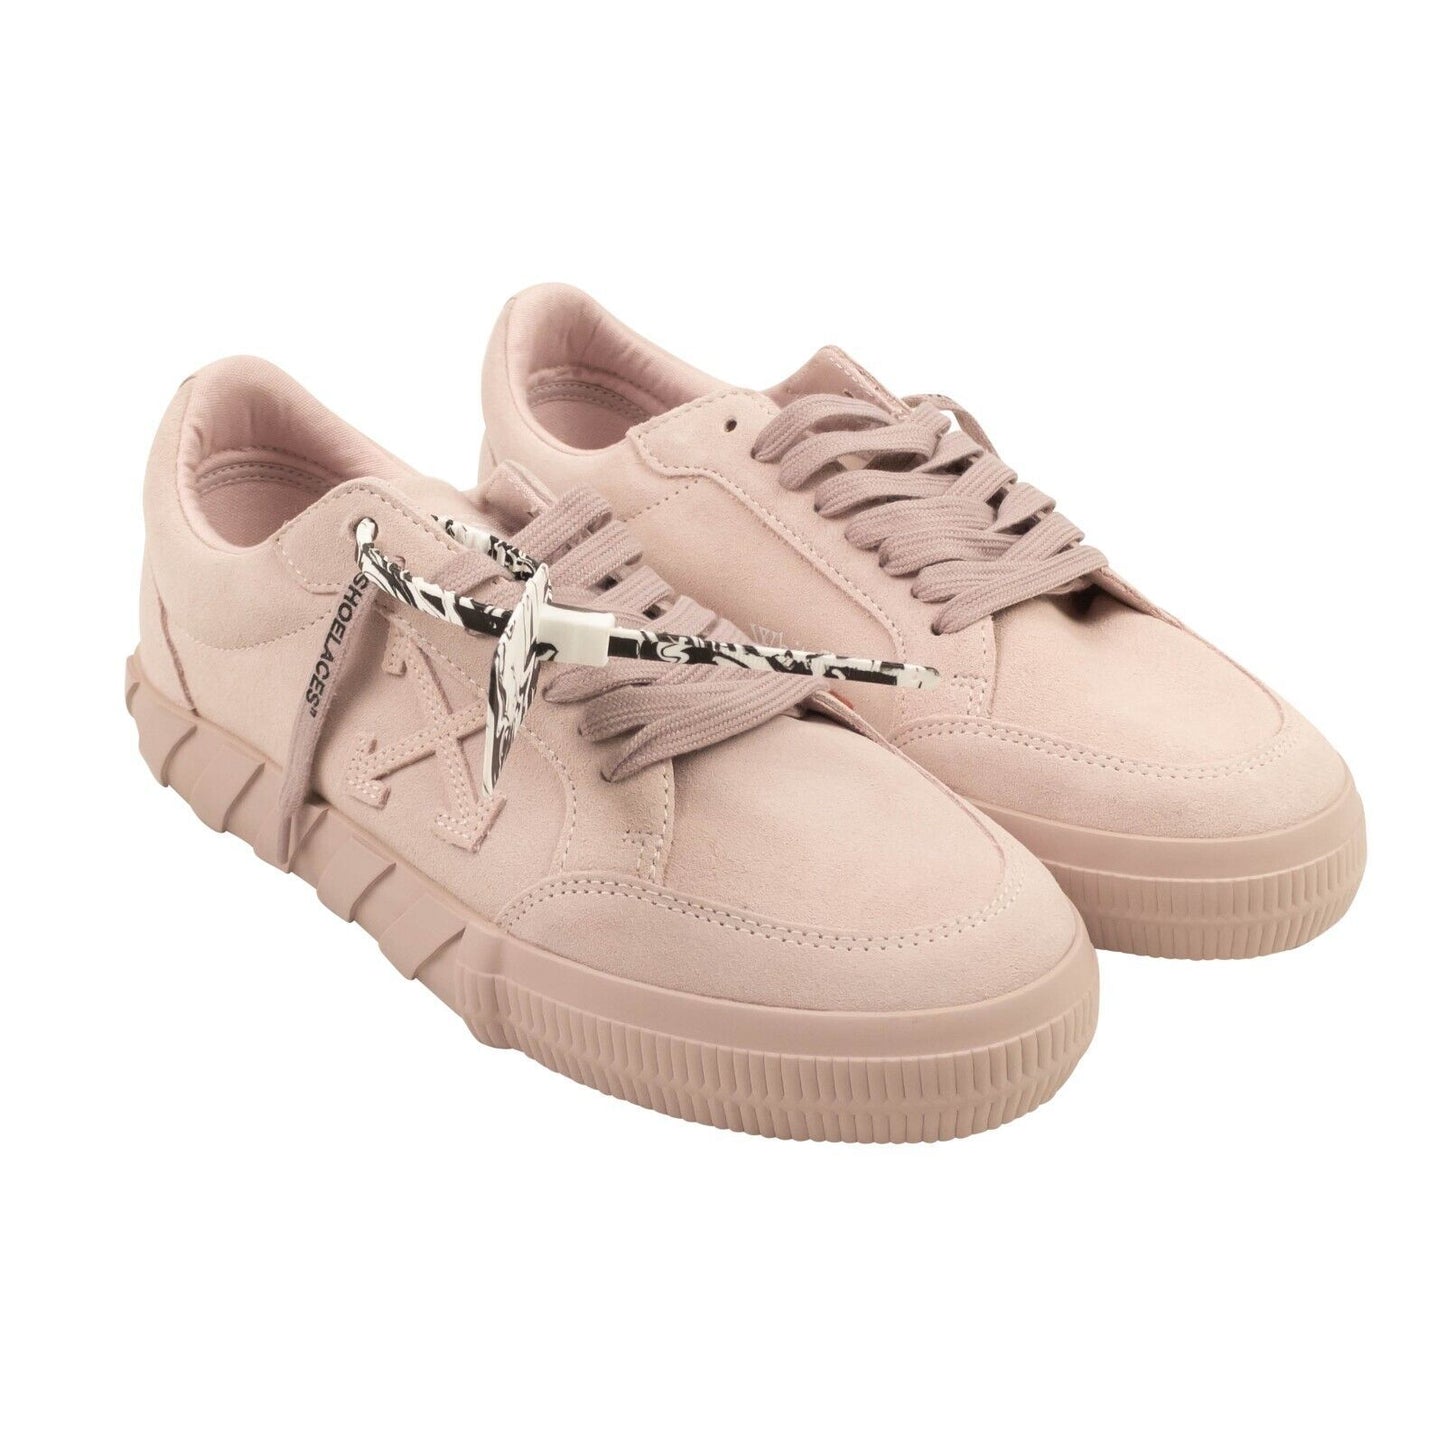 Chic Pink Suede Low Top Sneakers